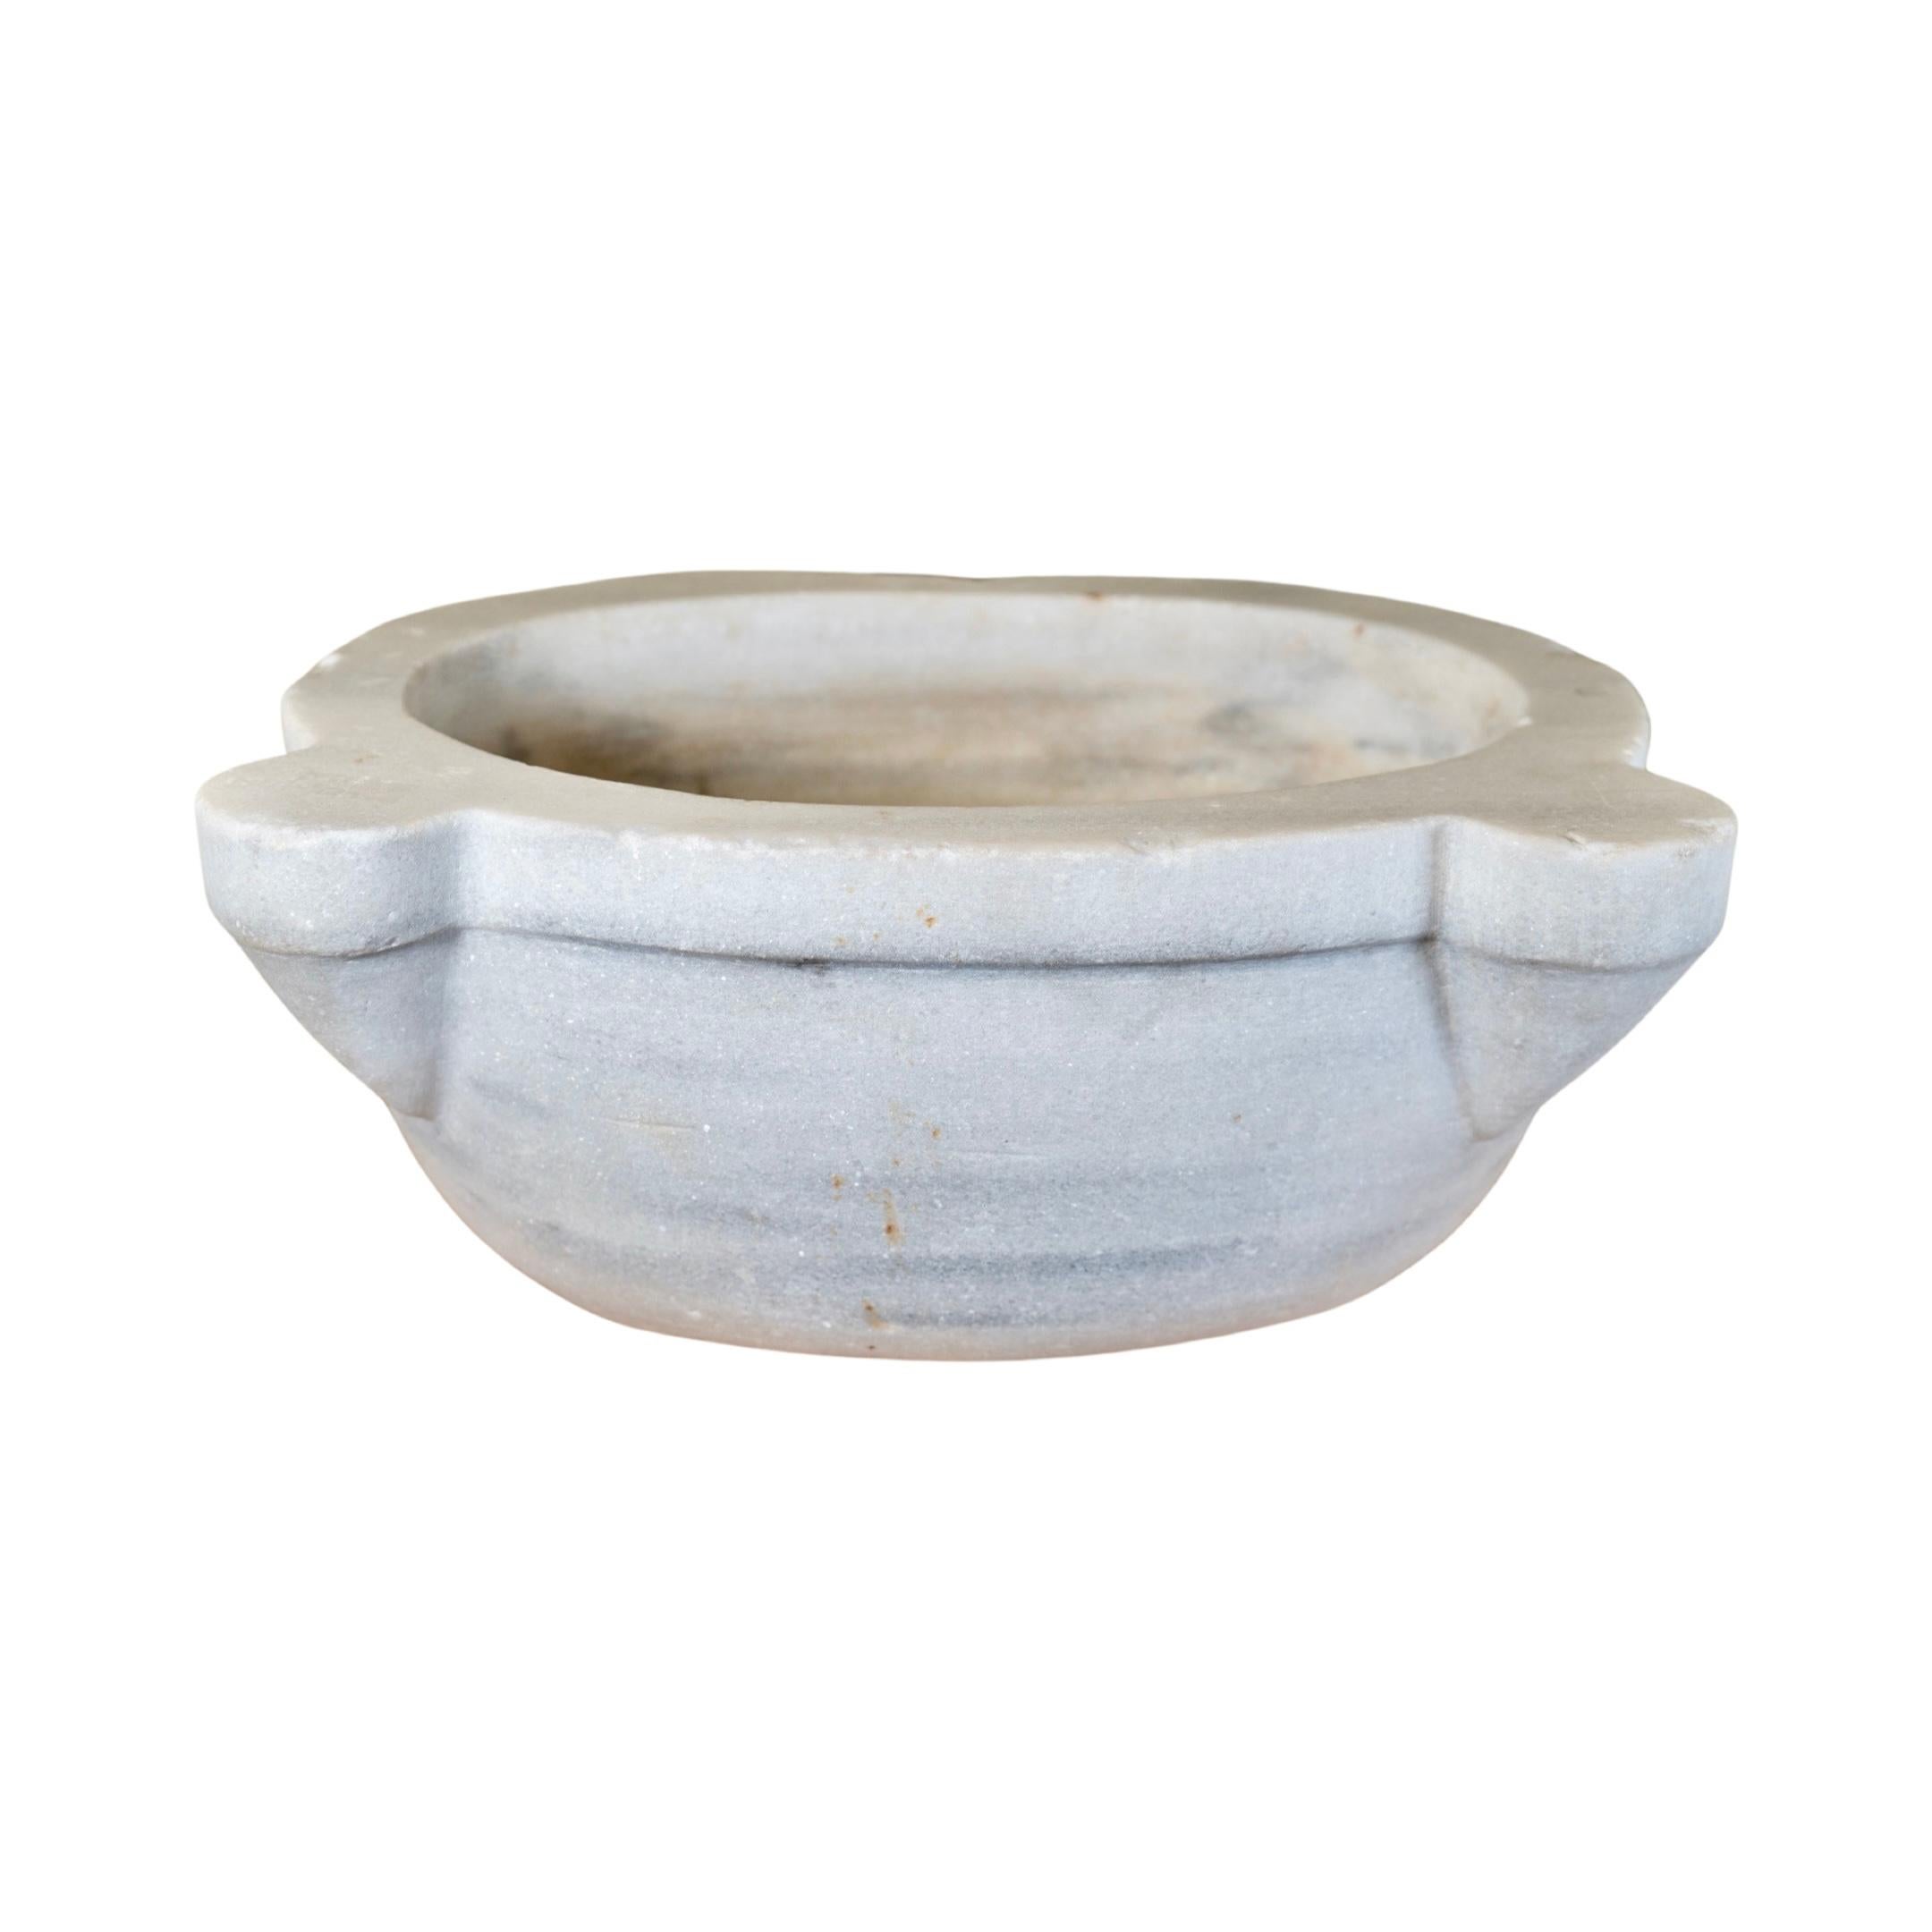 This elegant vessel sink features a deep French white marble bowl and an 18th-century-inspired design. Perfect for a traditional bathroom, it’s a timeless way to give your space a luxurious look and feel. The natural stone brings a durable,